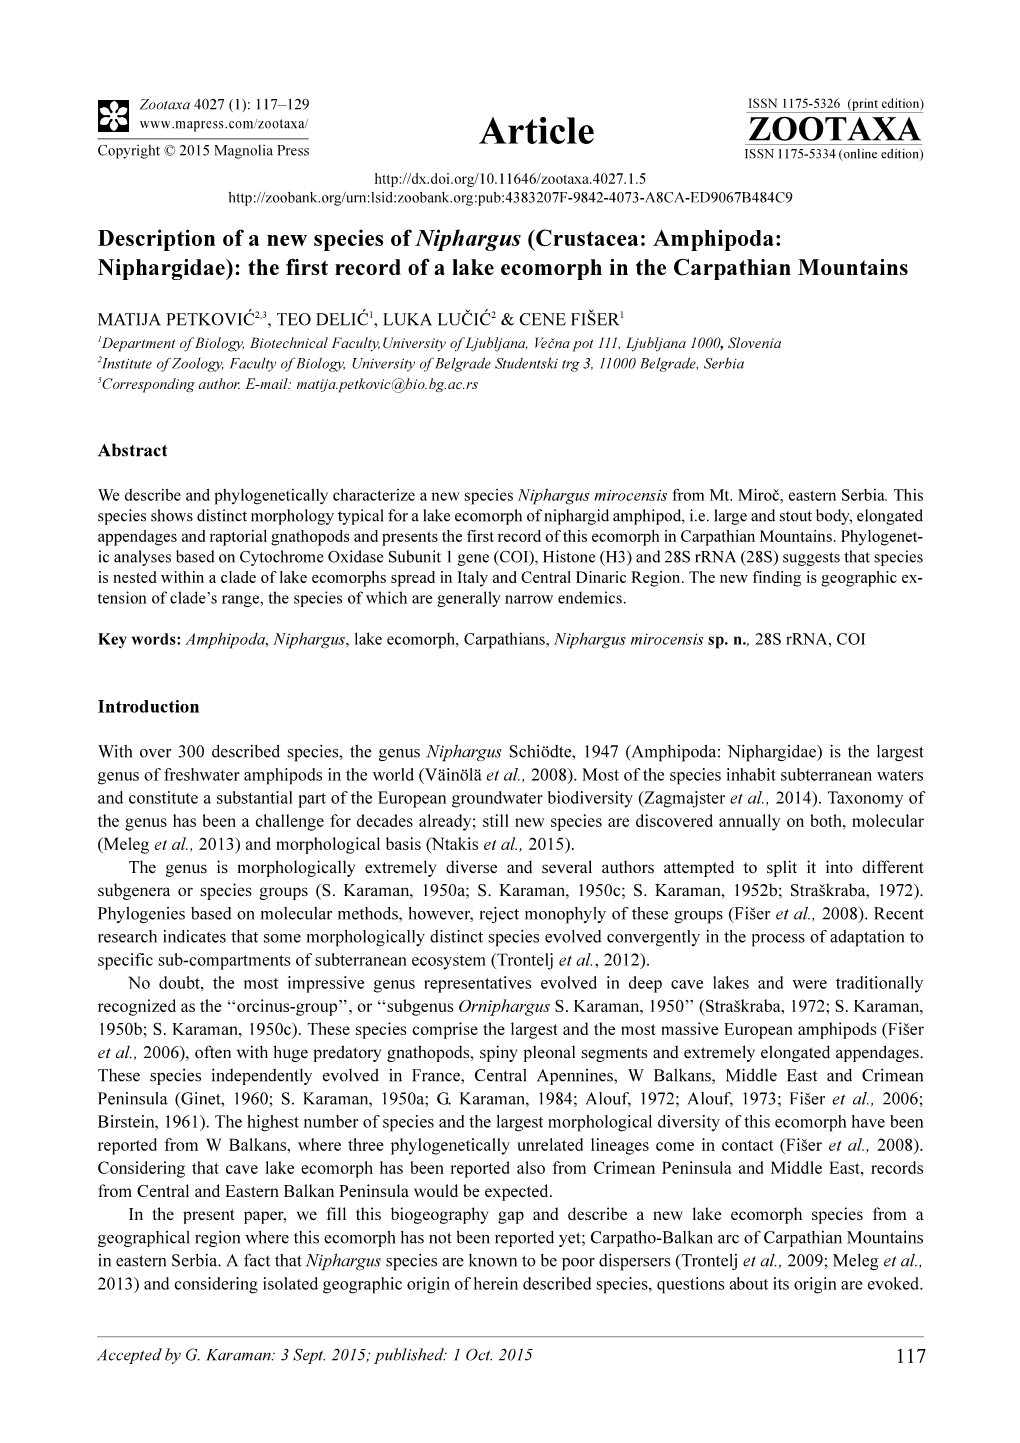 Description of a New Species of Niphargus (Crustacea: Amphipoda: Niphargidae): the First Record of a Lake Ecomorph in the Carpathian Mountains